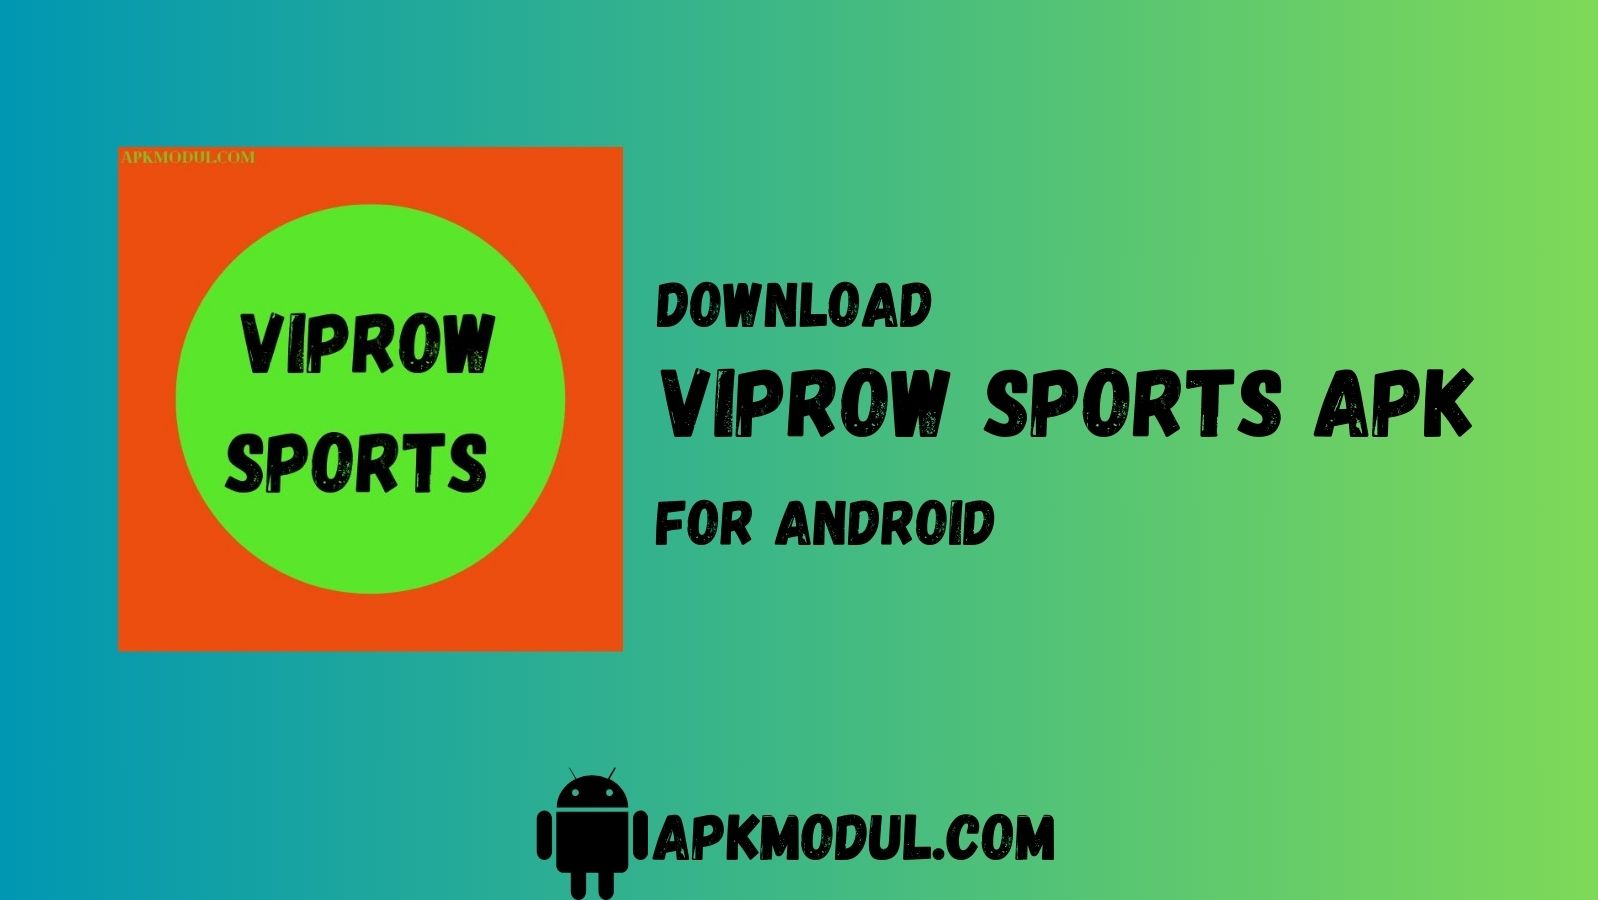 Viprow Sports App download